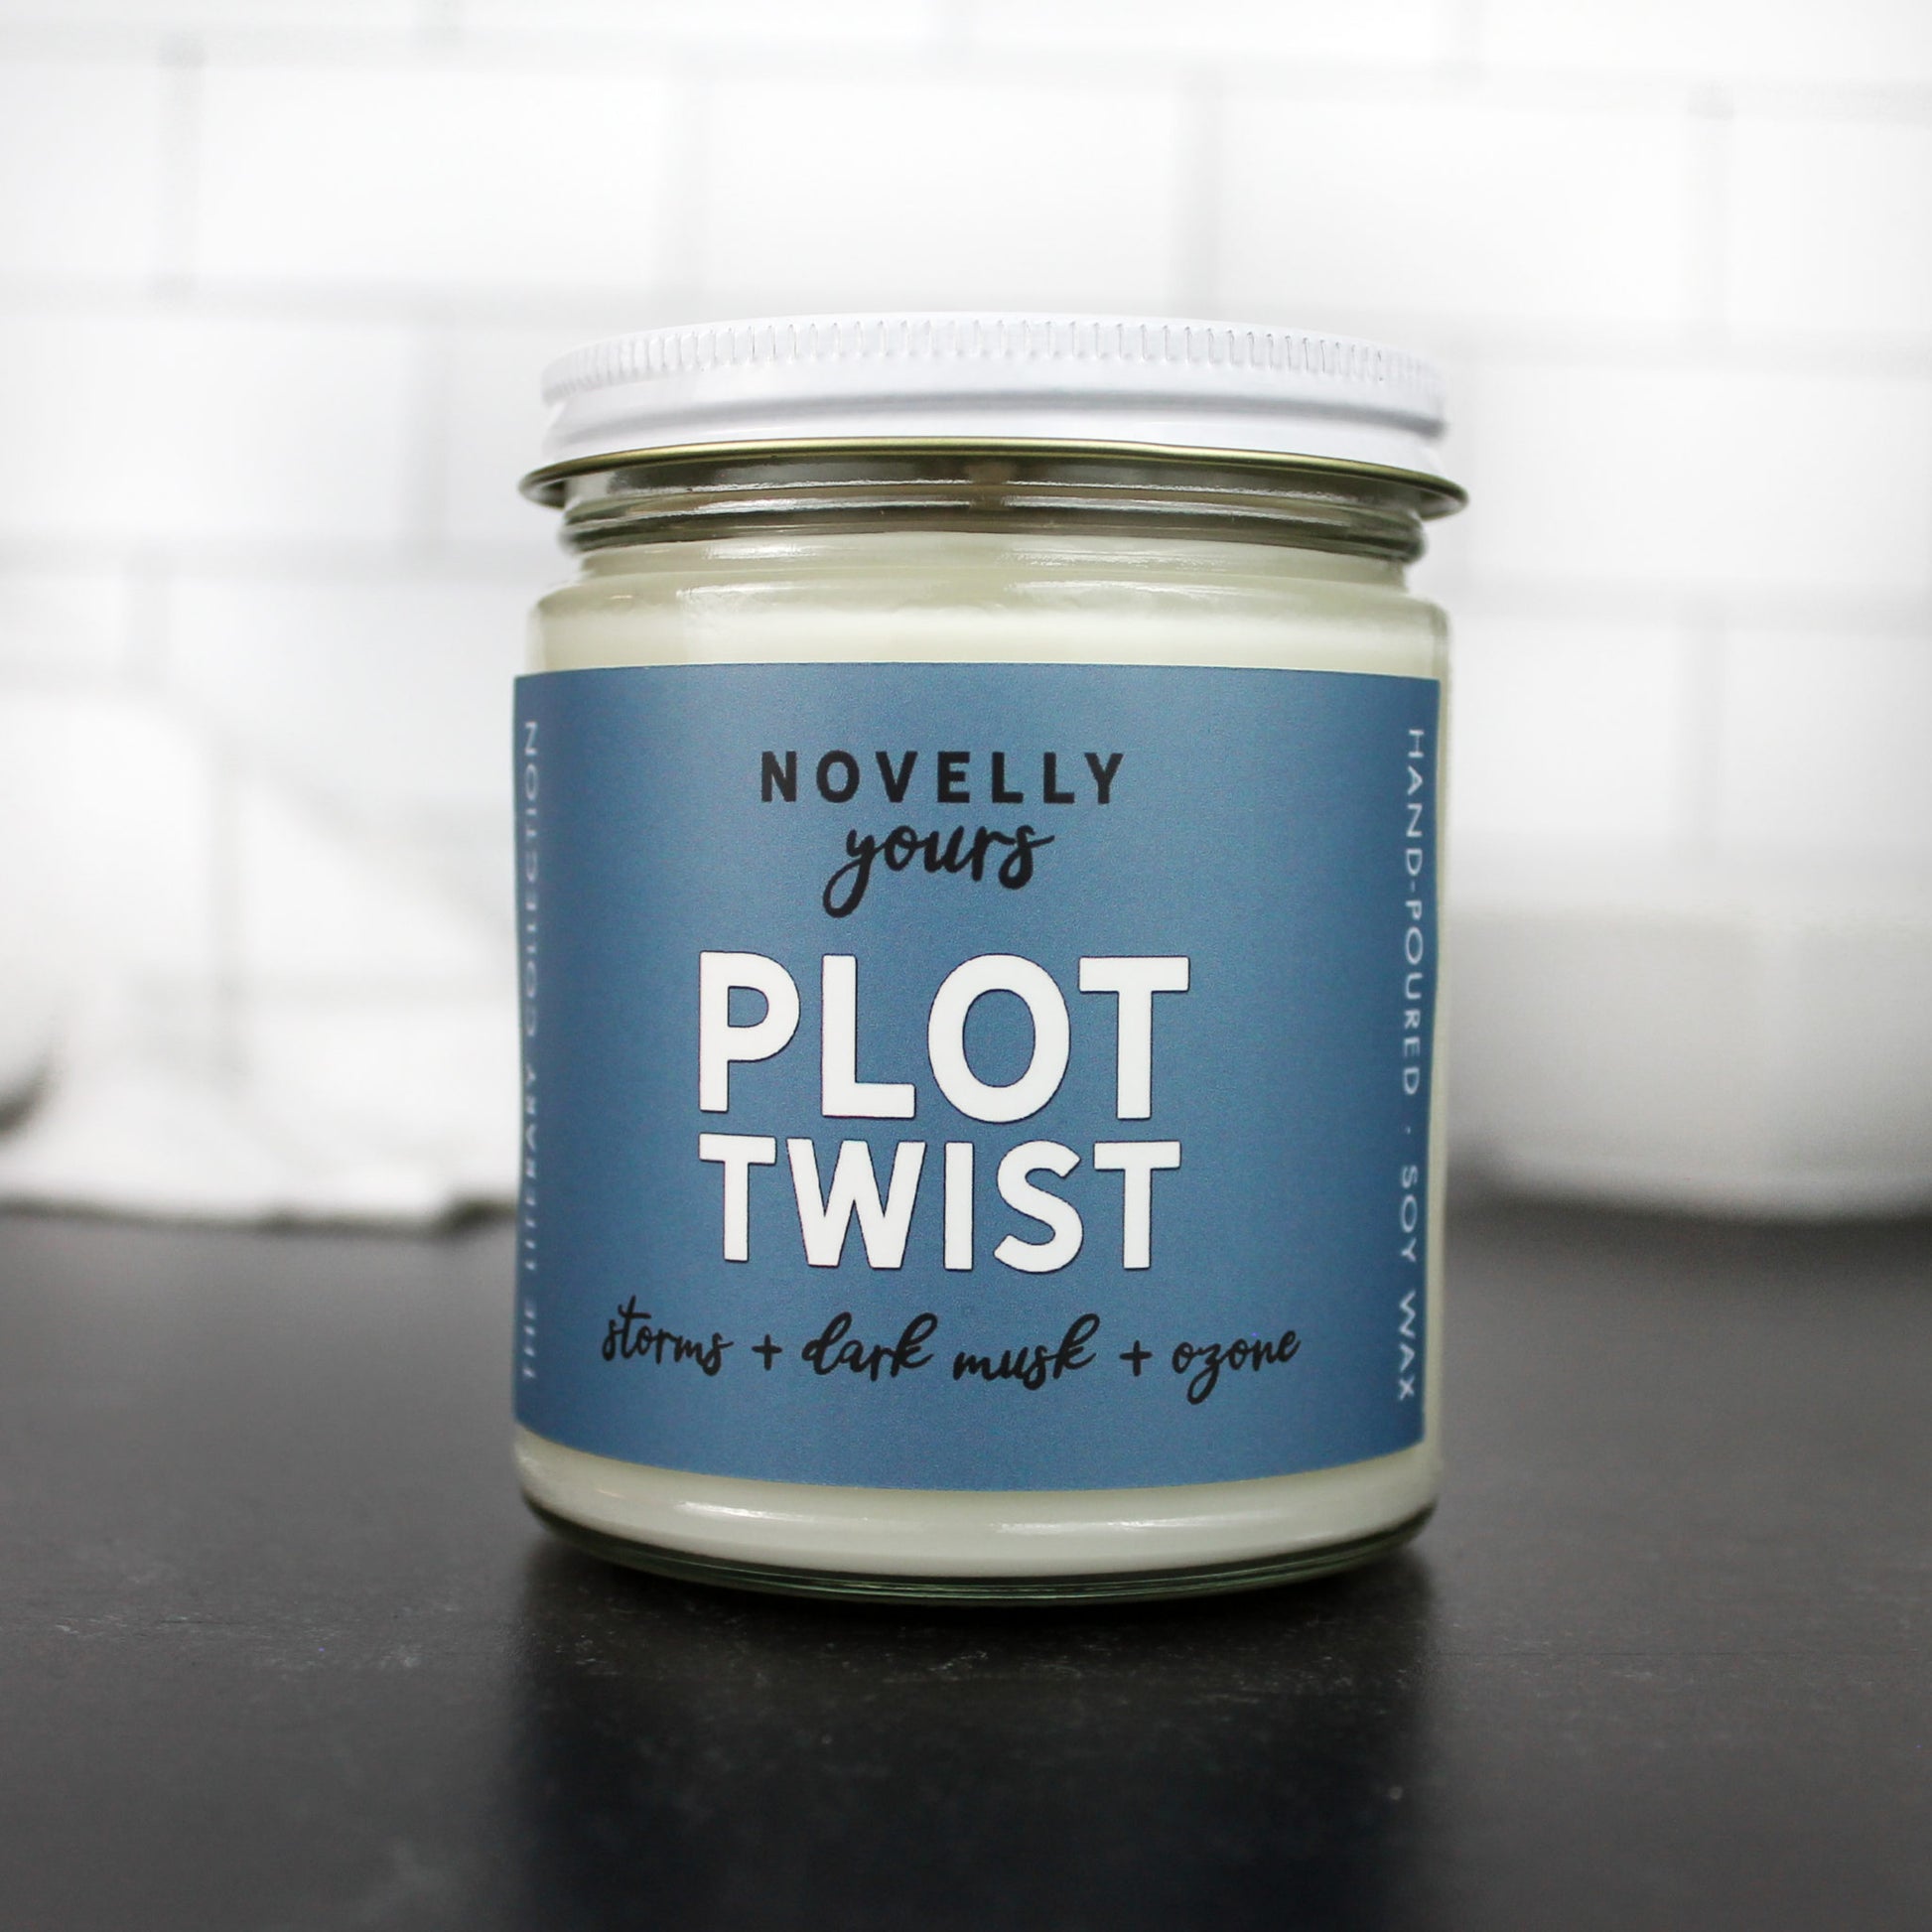 plot twist scented soy wax candle in clear glass jar with white lid and blue label